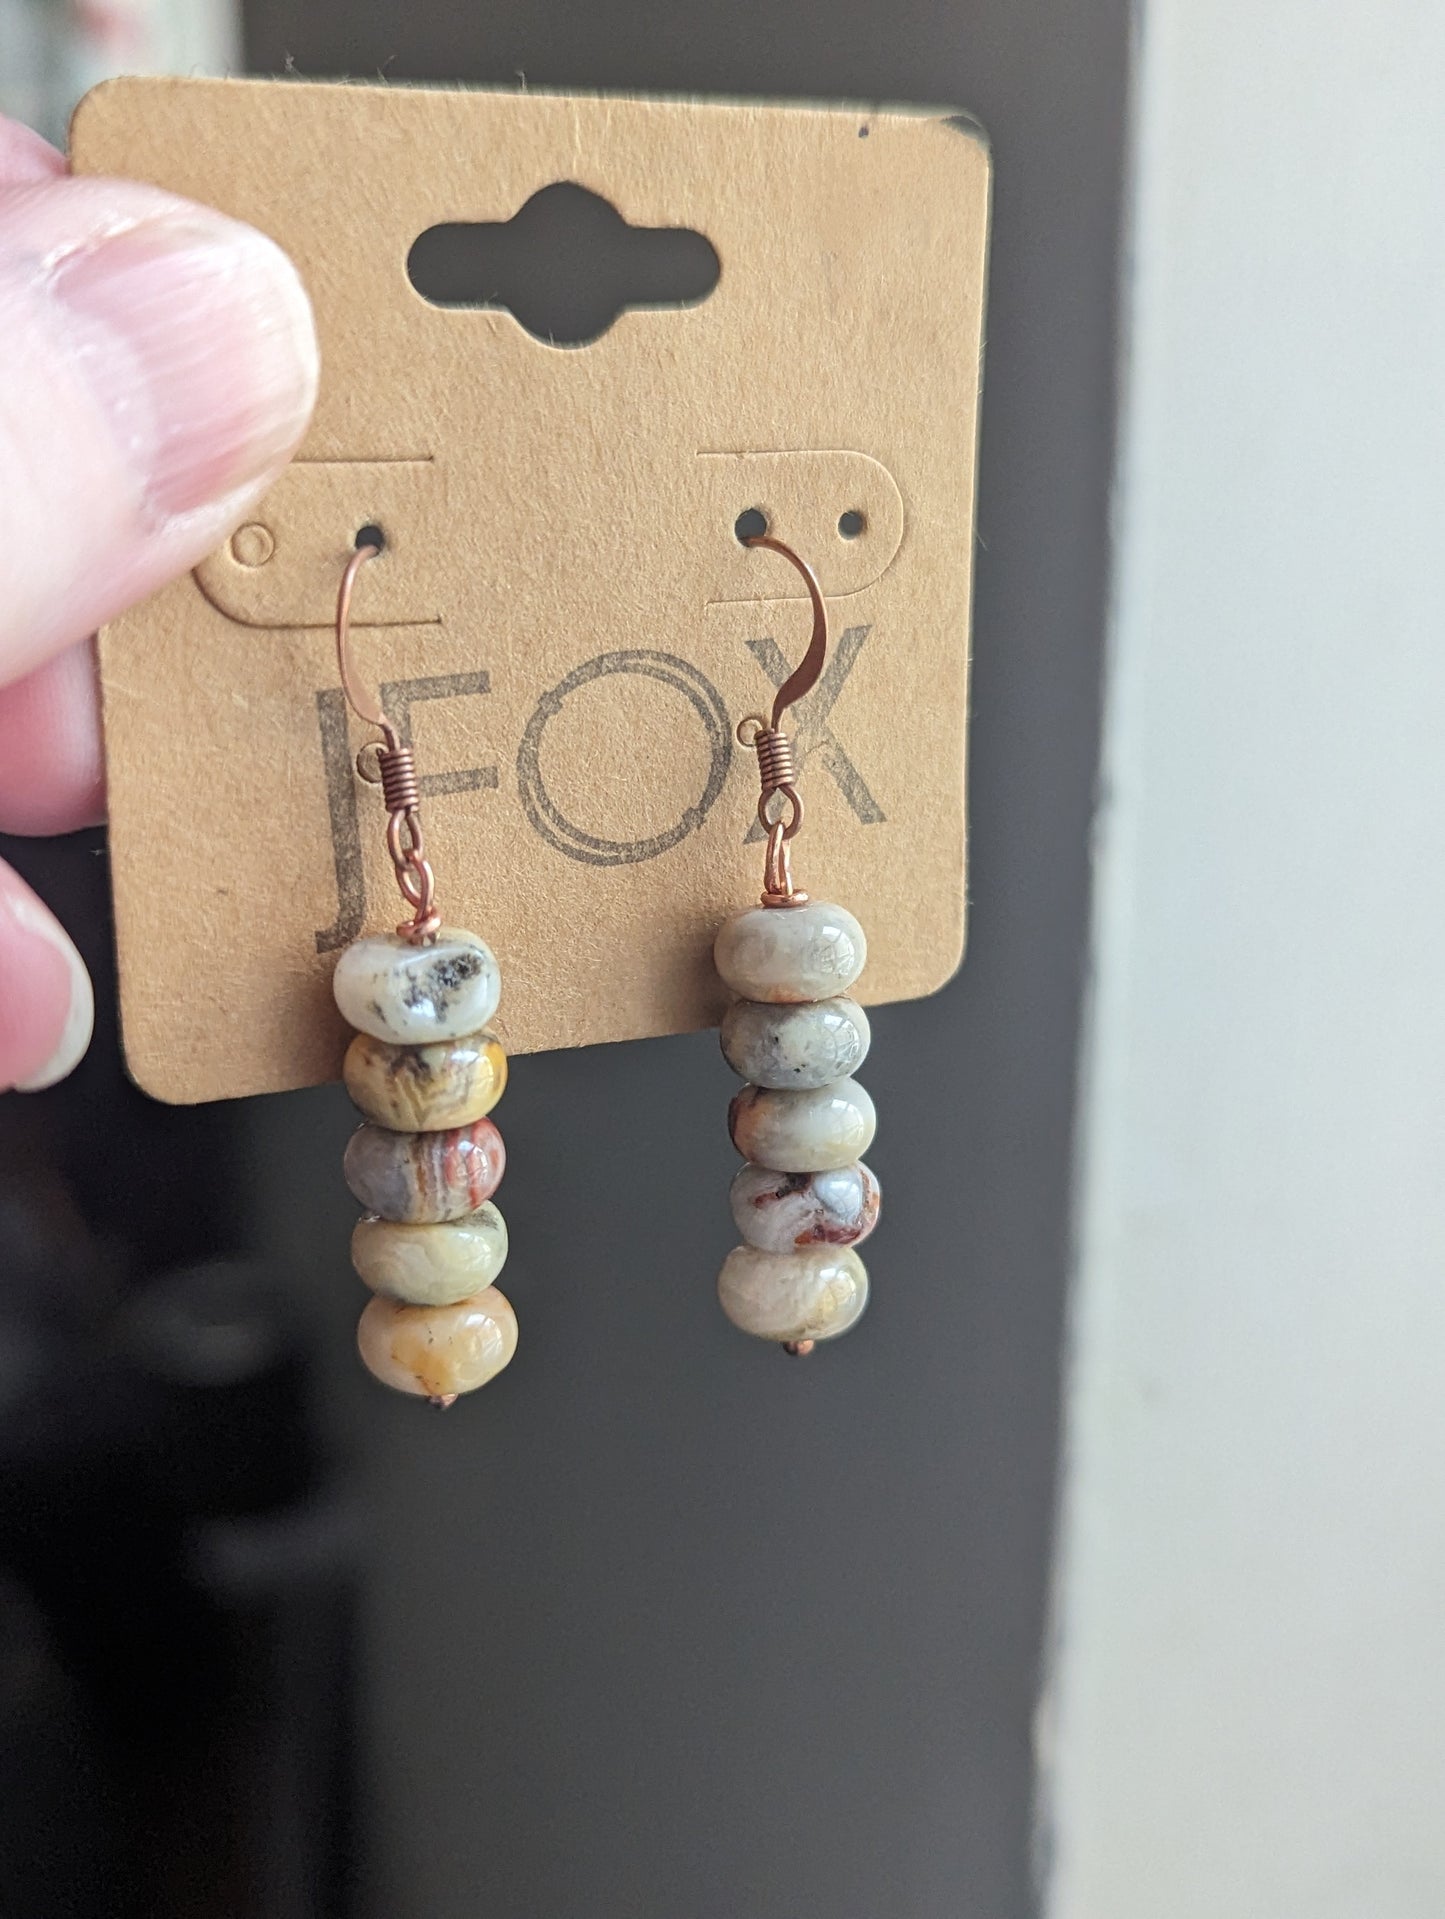 Crazy Lace Agate Drop Earrings